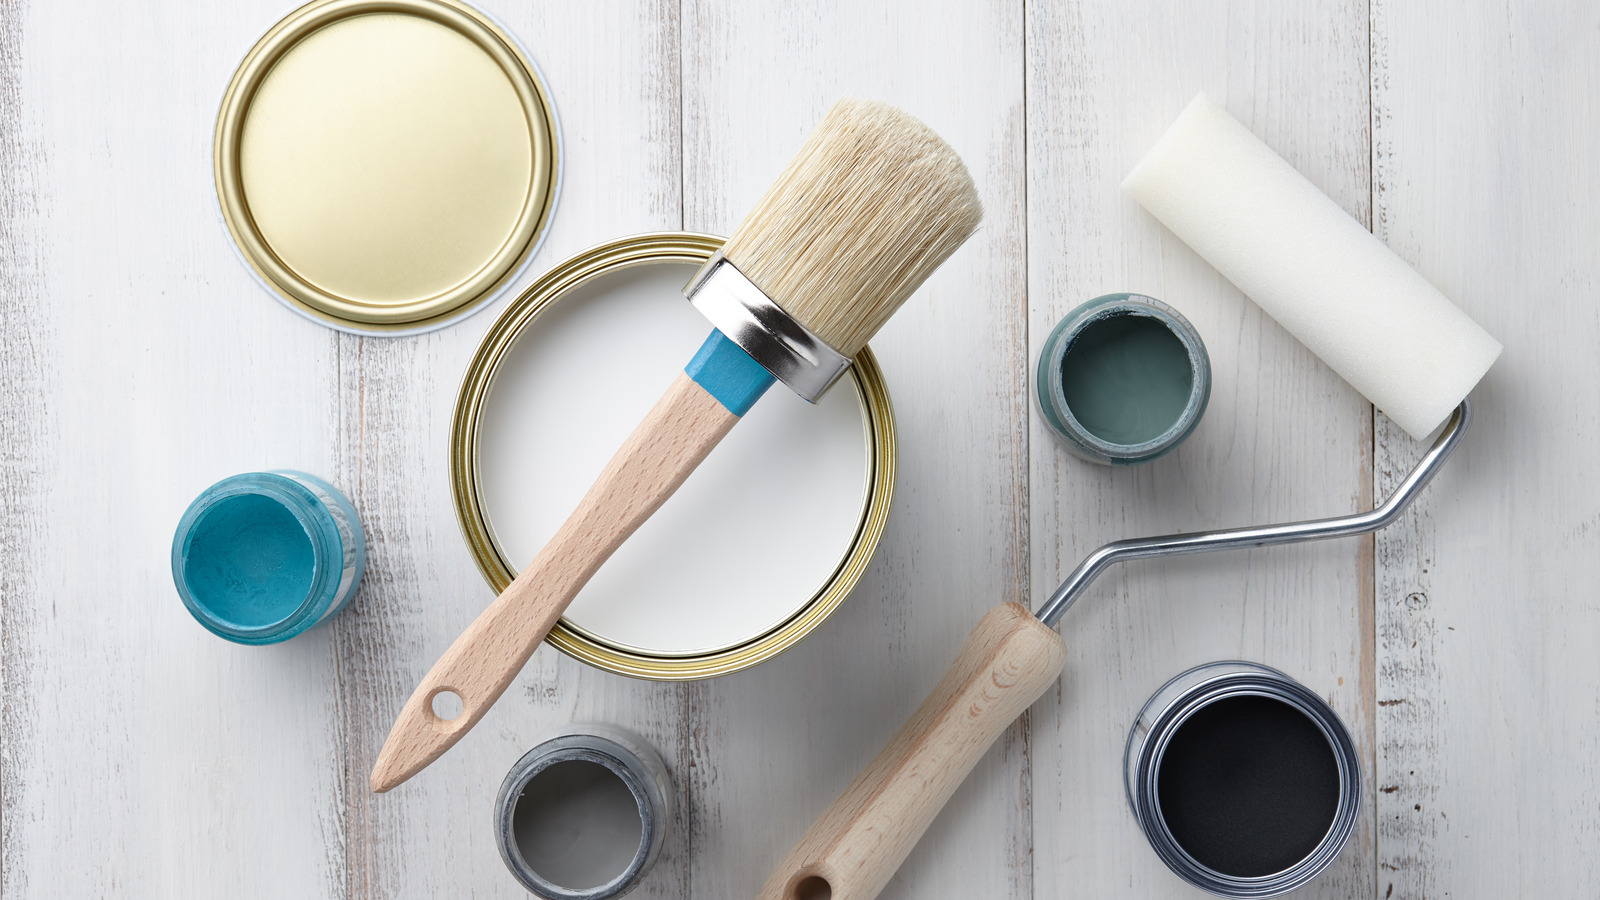 House Digest Survey: The Trendy Color 32% Of People Would Love To Paint ...